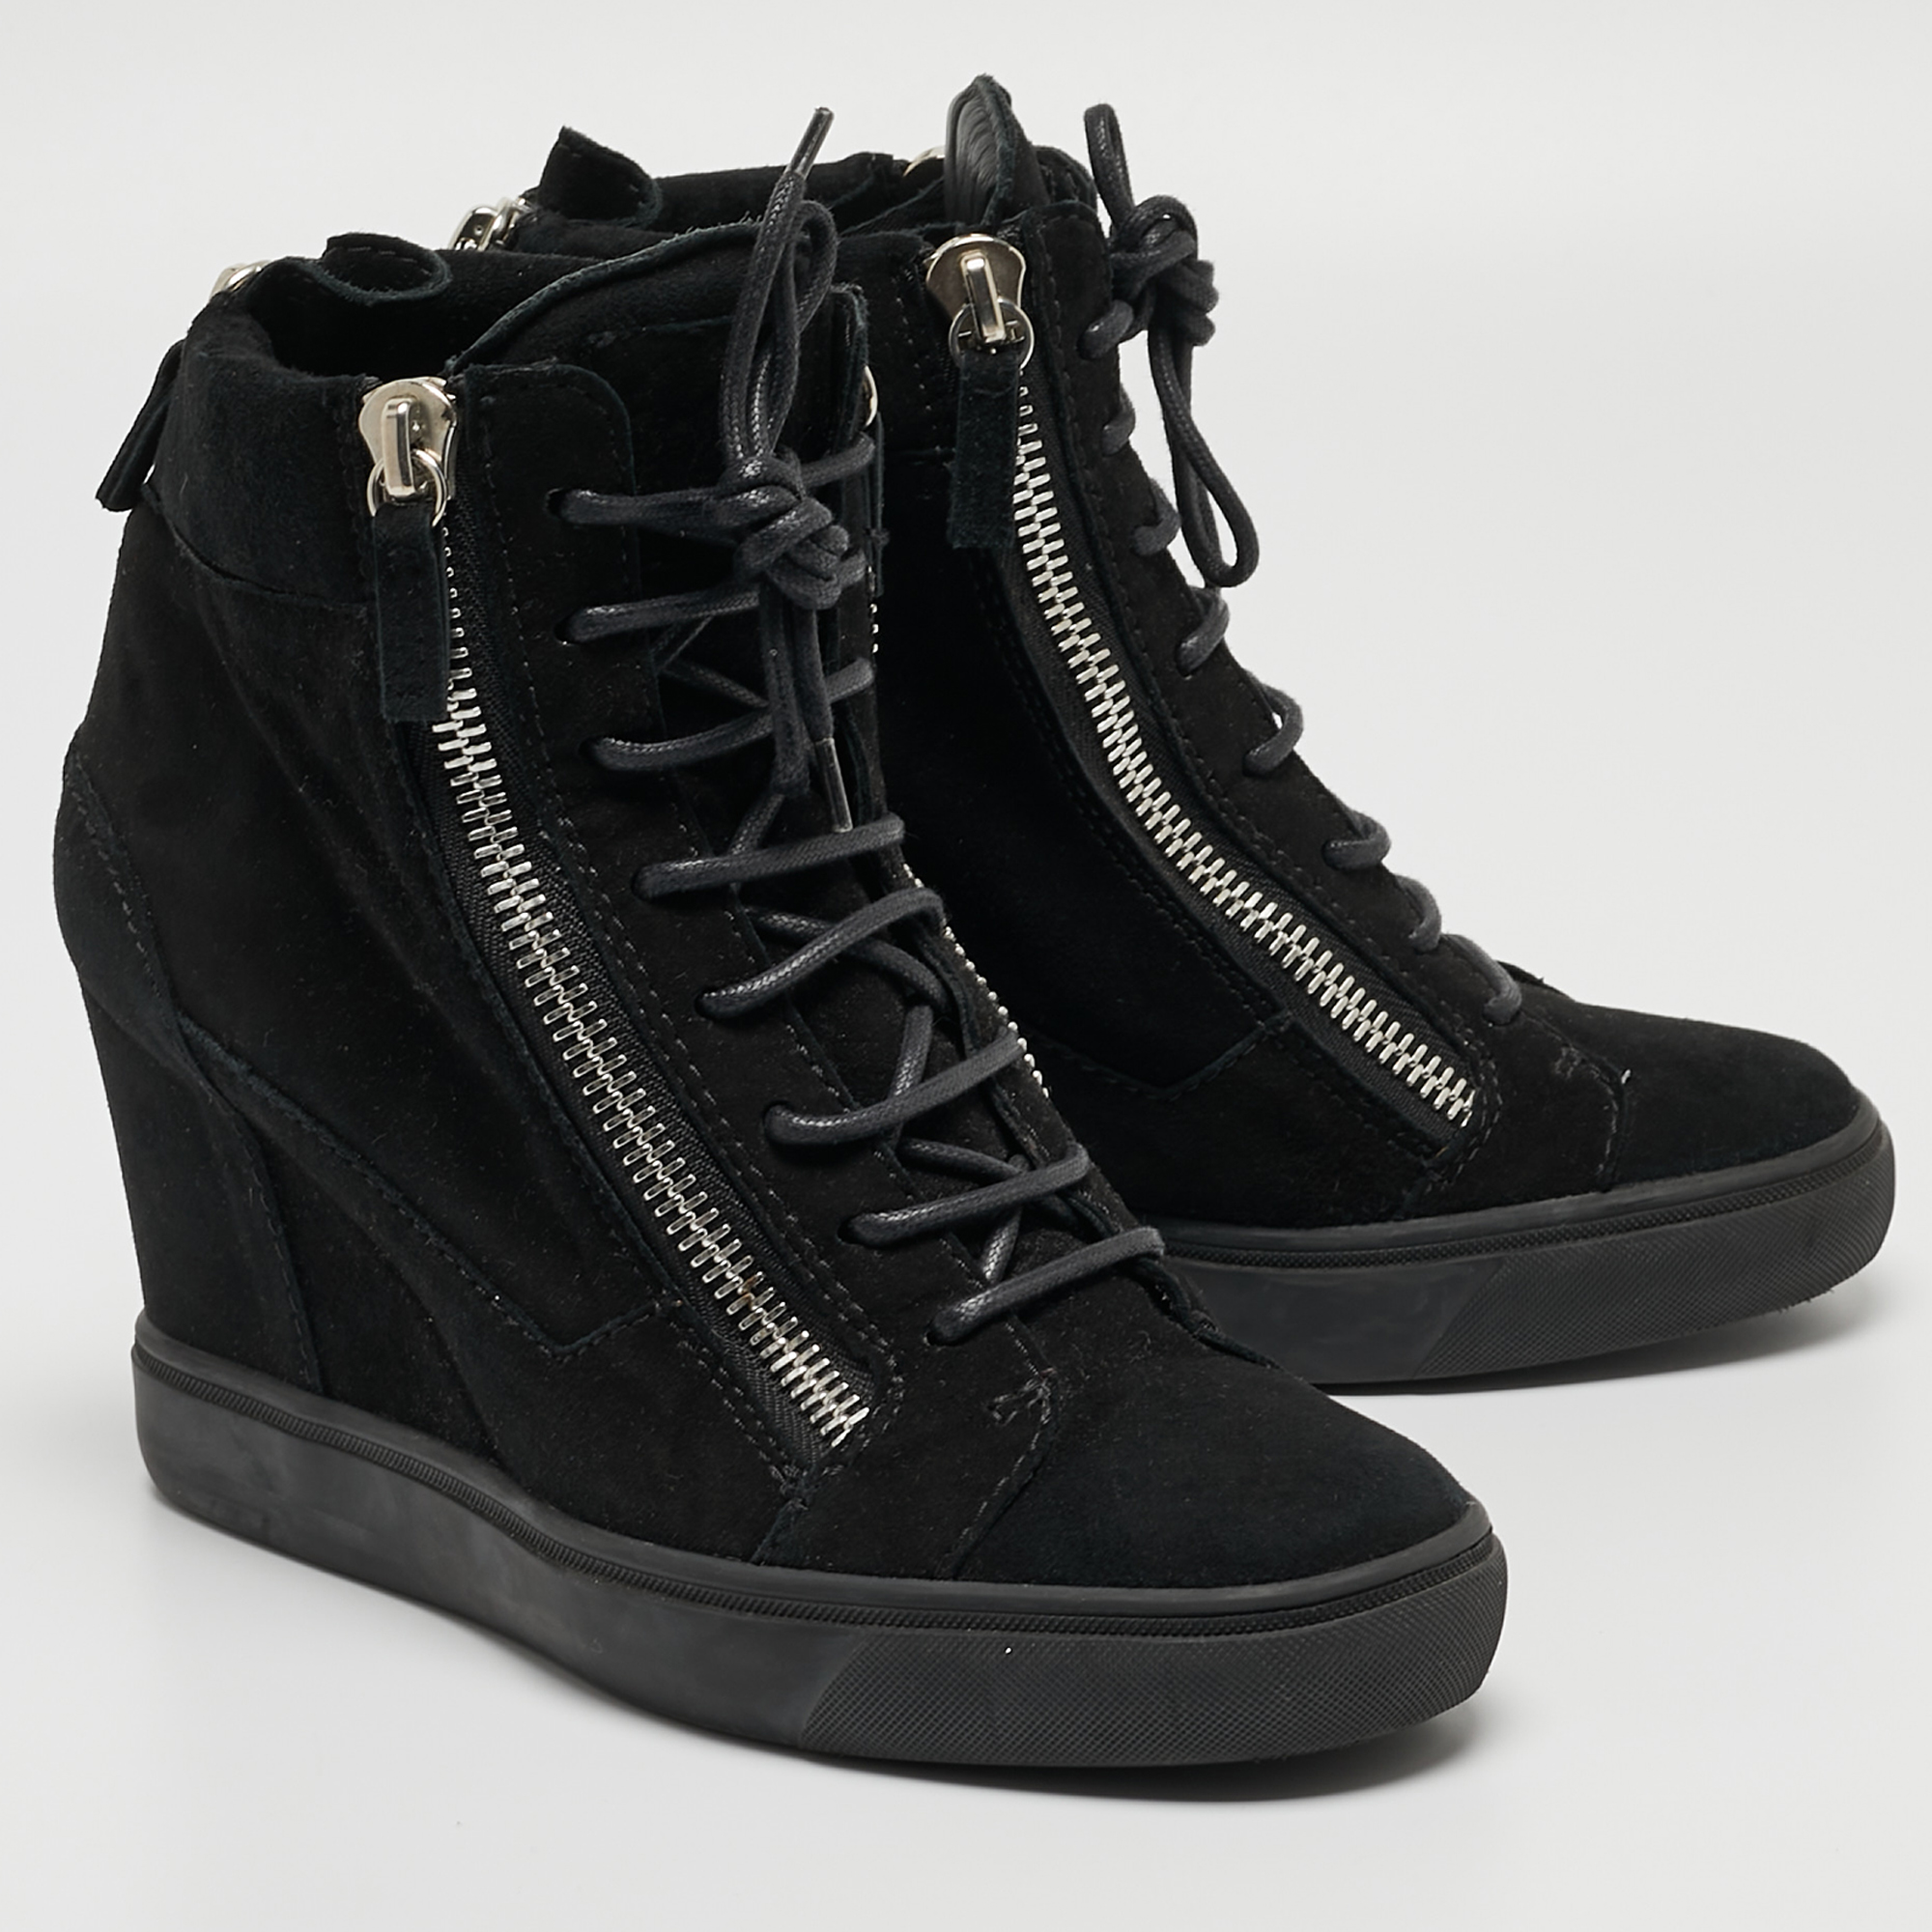 Giuseppe Zanotti Black Suede High Top Wedge Sneakers Size 40